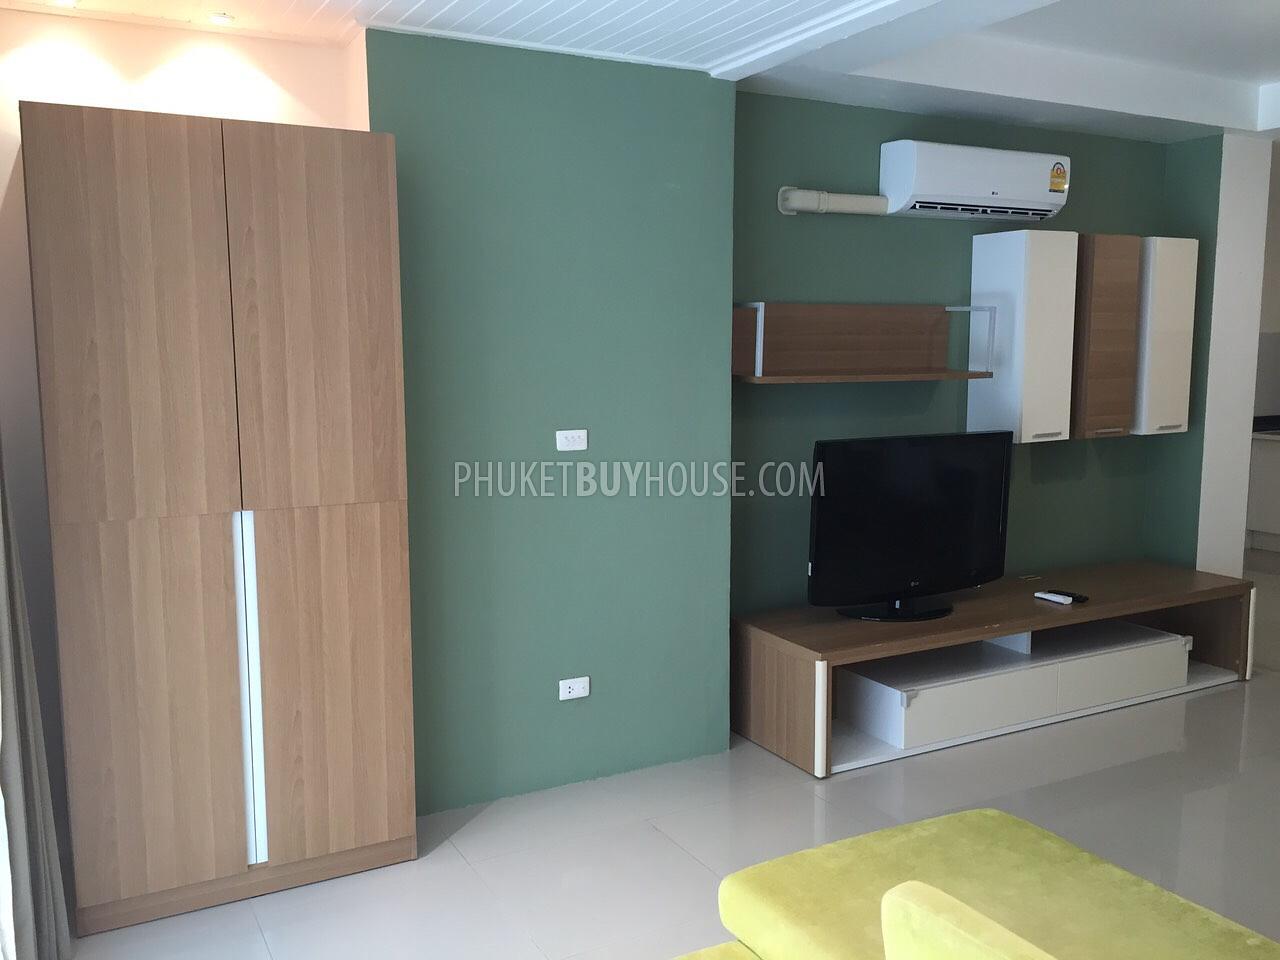 PAT5118: One bedroom apartment in the heart of Patong. Фото #8